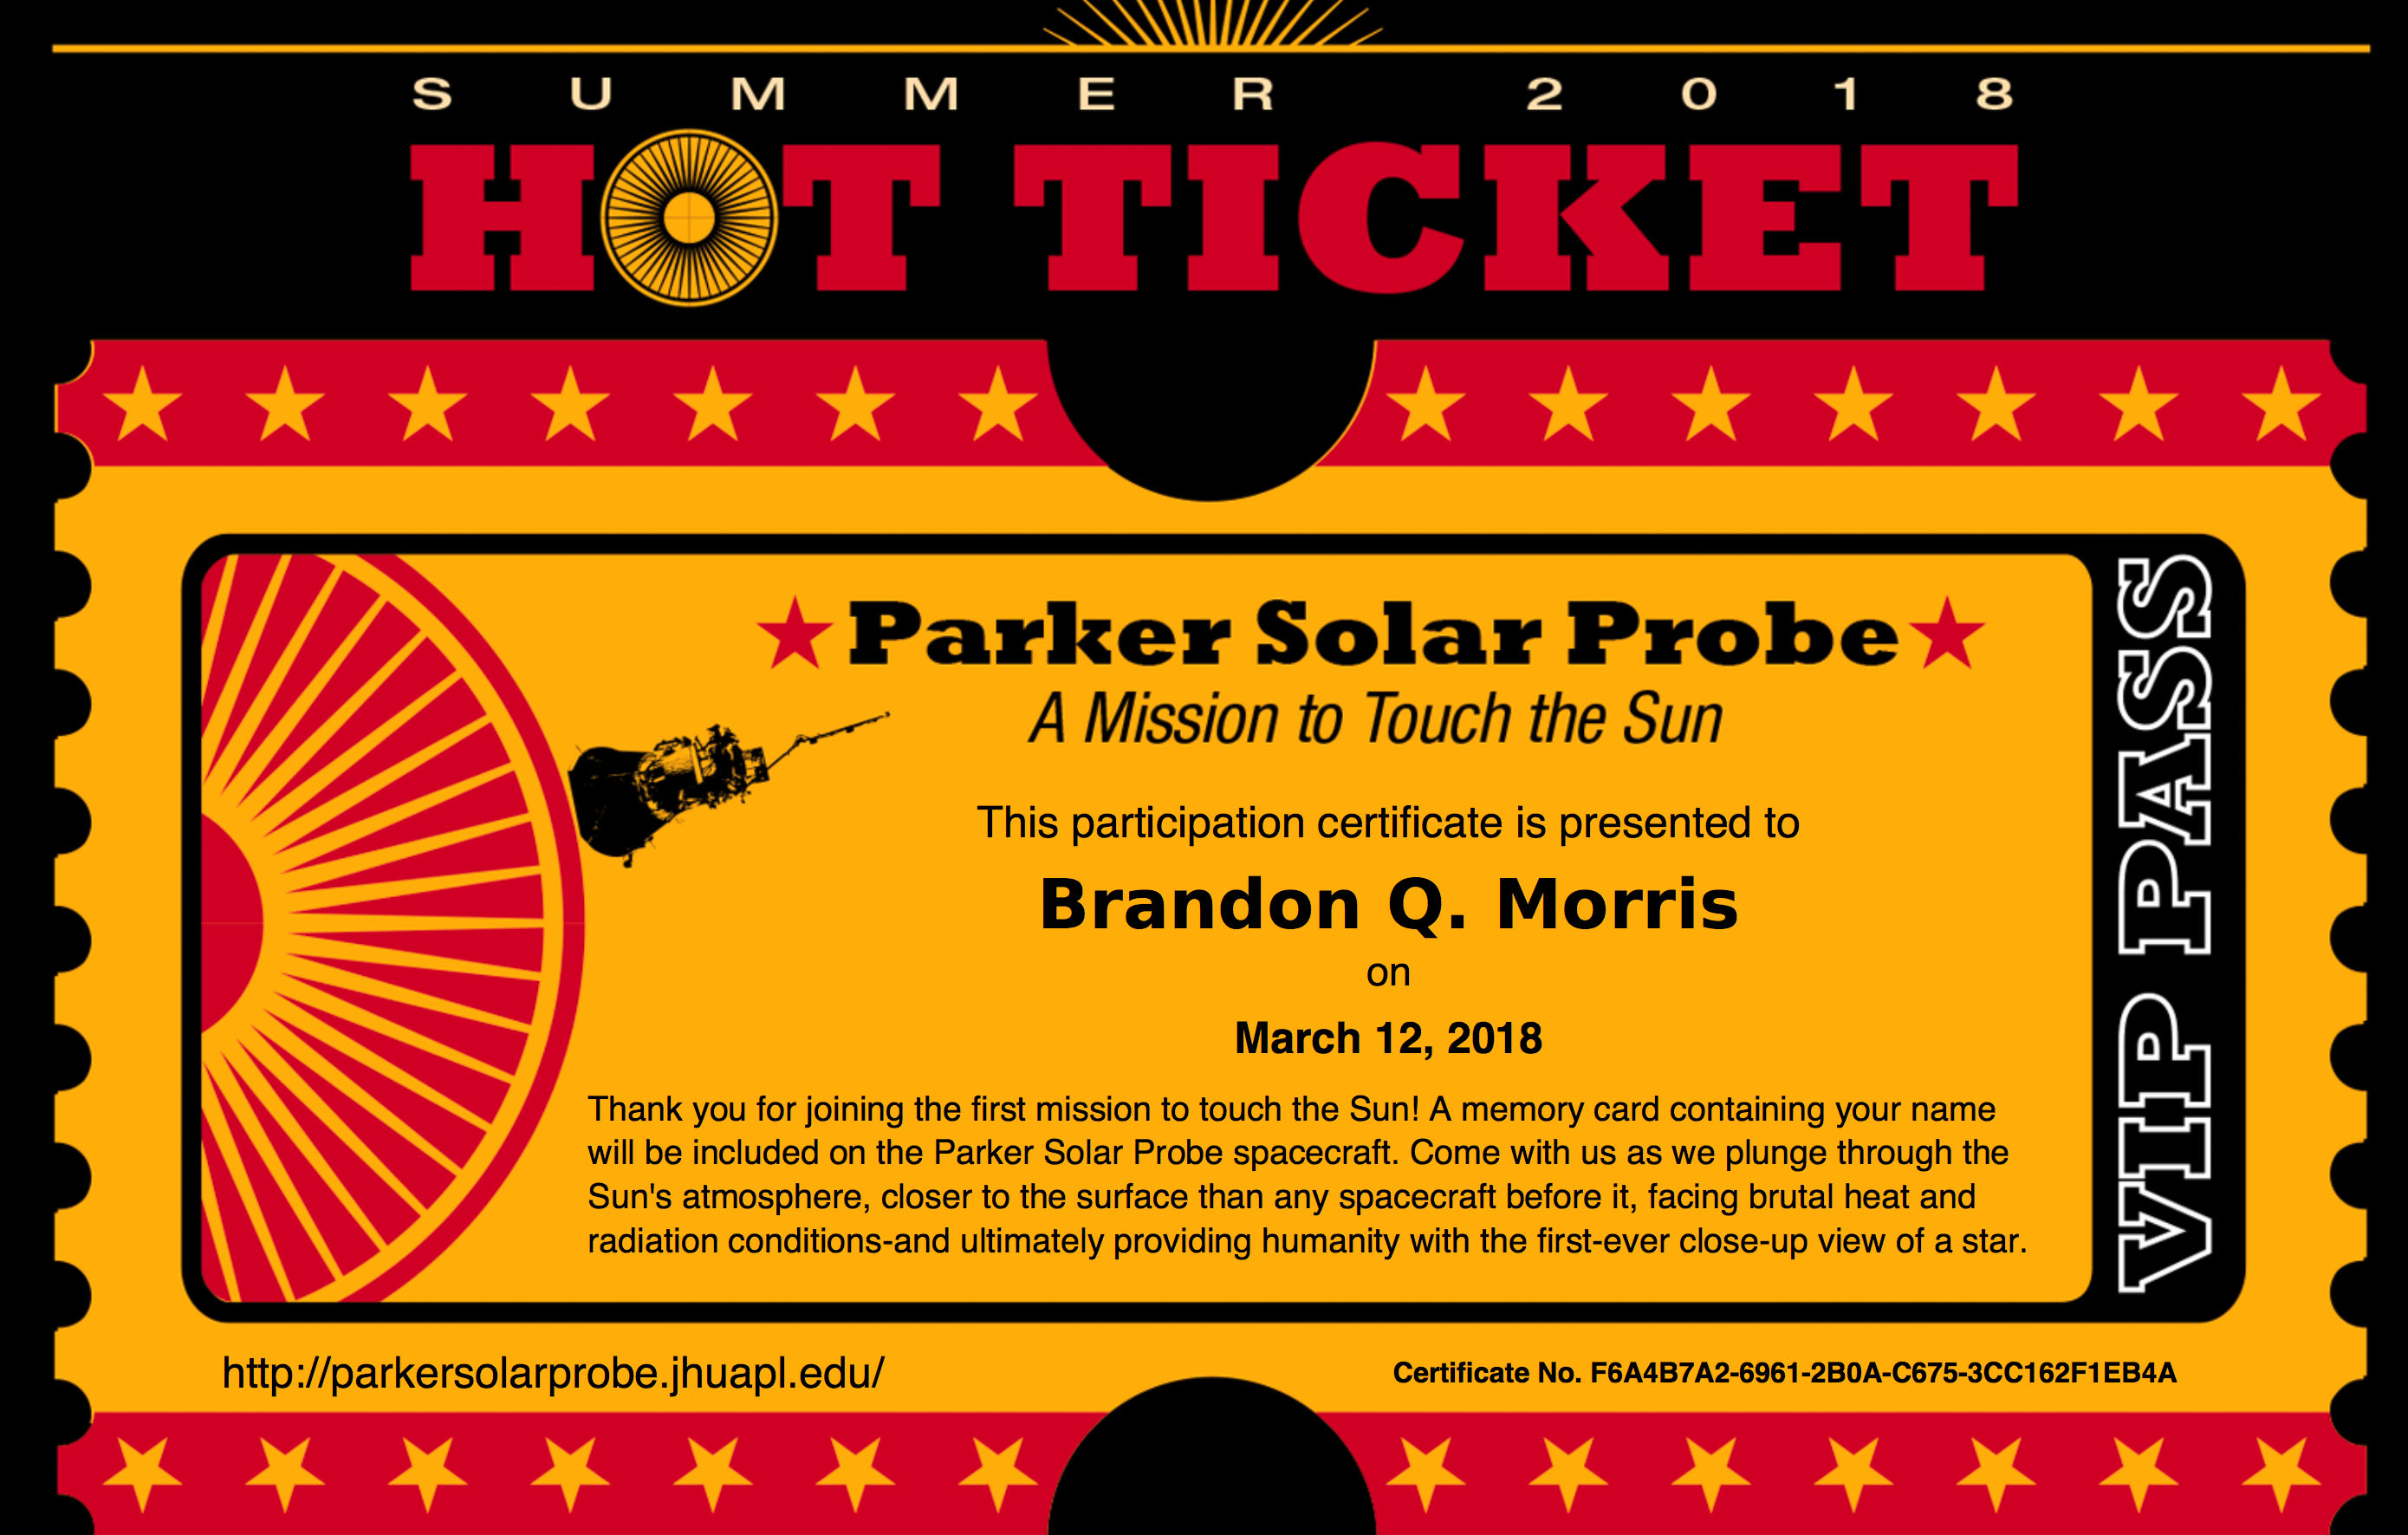 Hot tickets. Certificate of participation NASA. You're my ticket to Space.